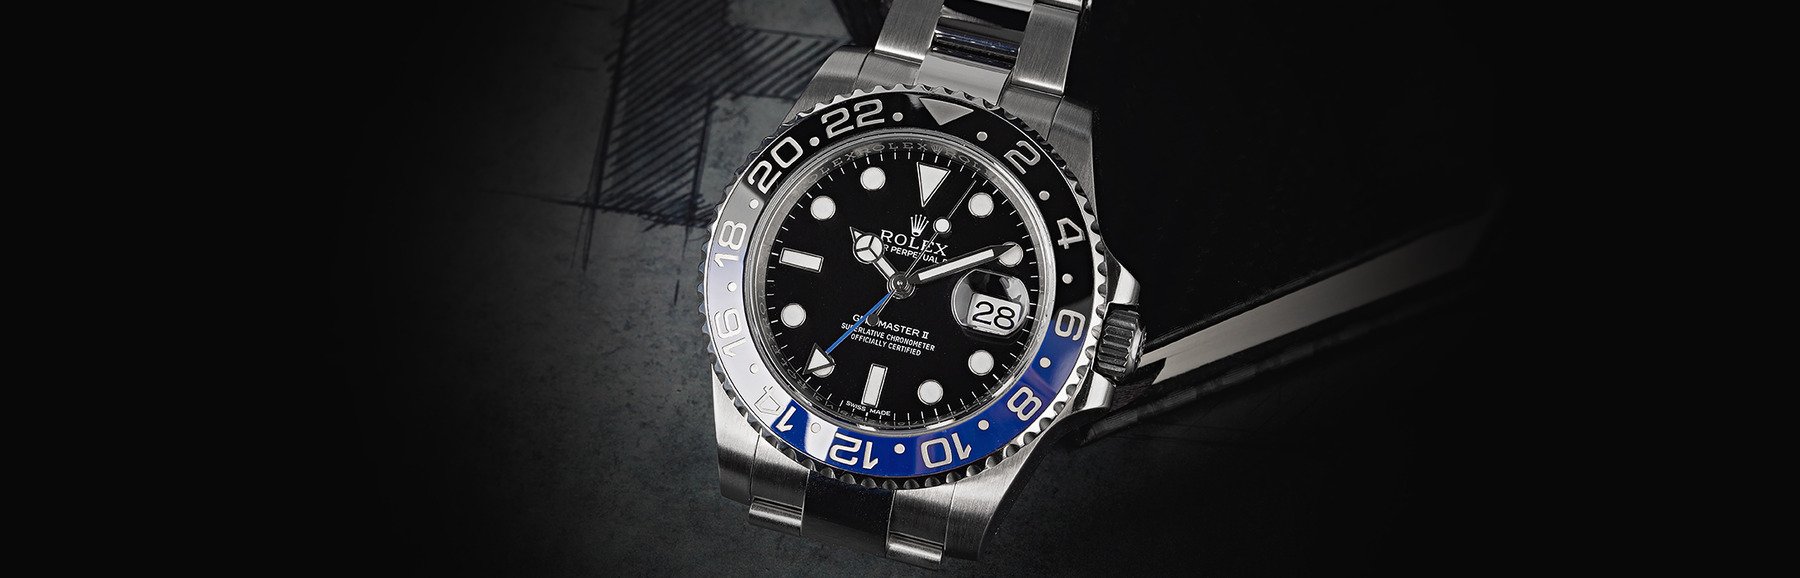 Celebrate Batman Day Like A Grown Up With The Rolex GMT-Master II 116710BLNR